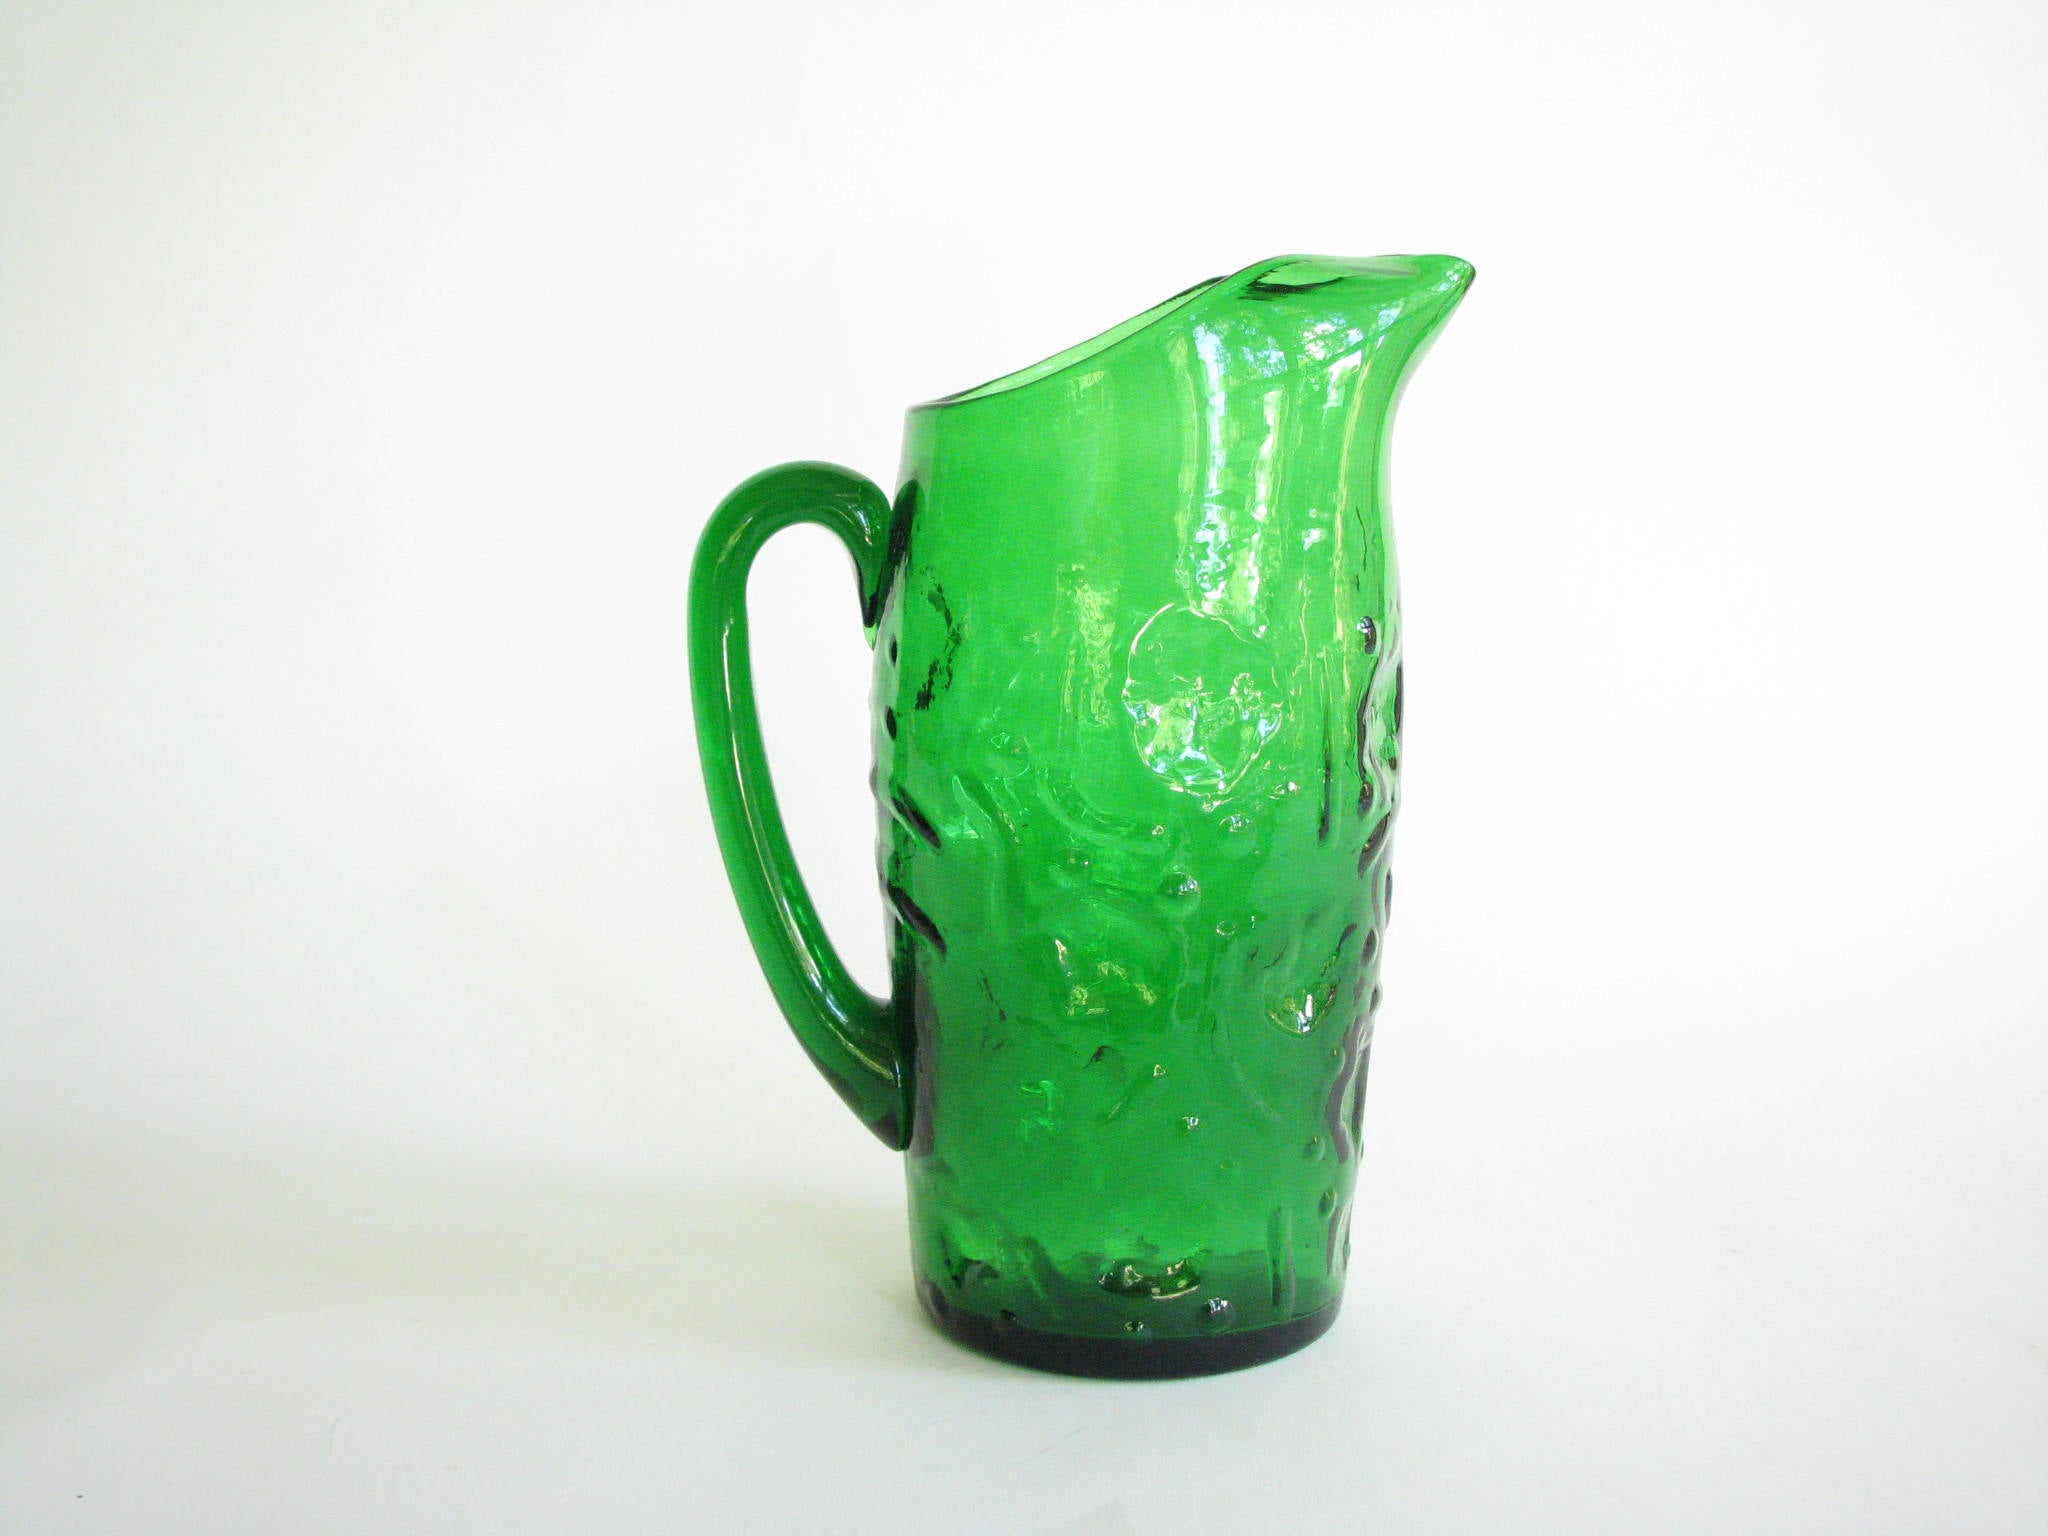 Pitcher With Green Juice 3D, Incl. pitcher & glass - Envato Elements